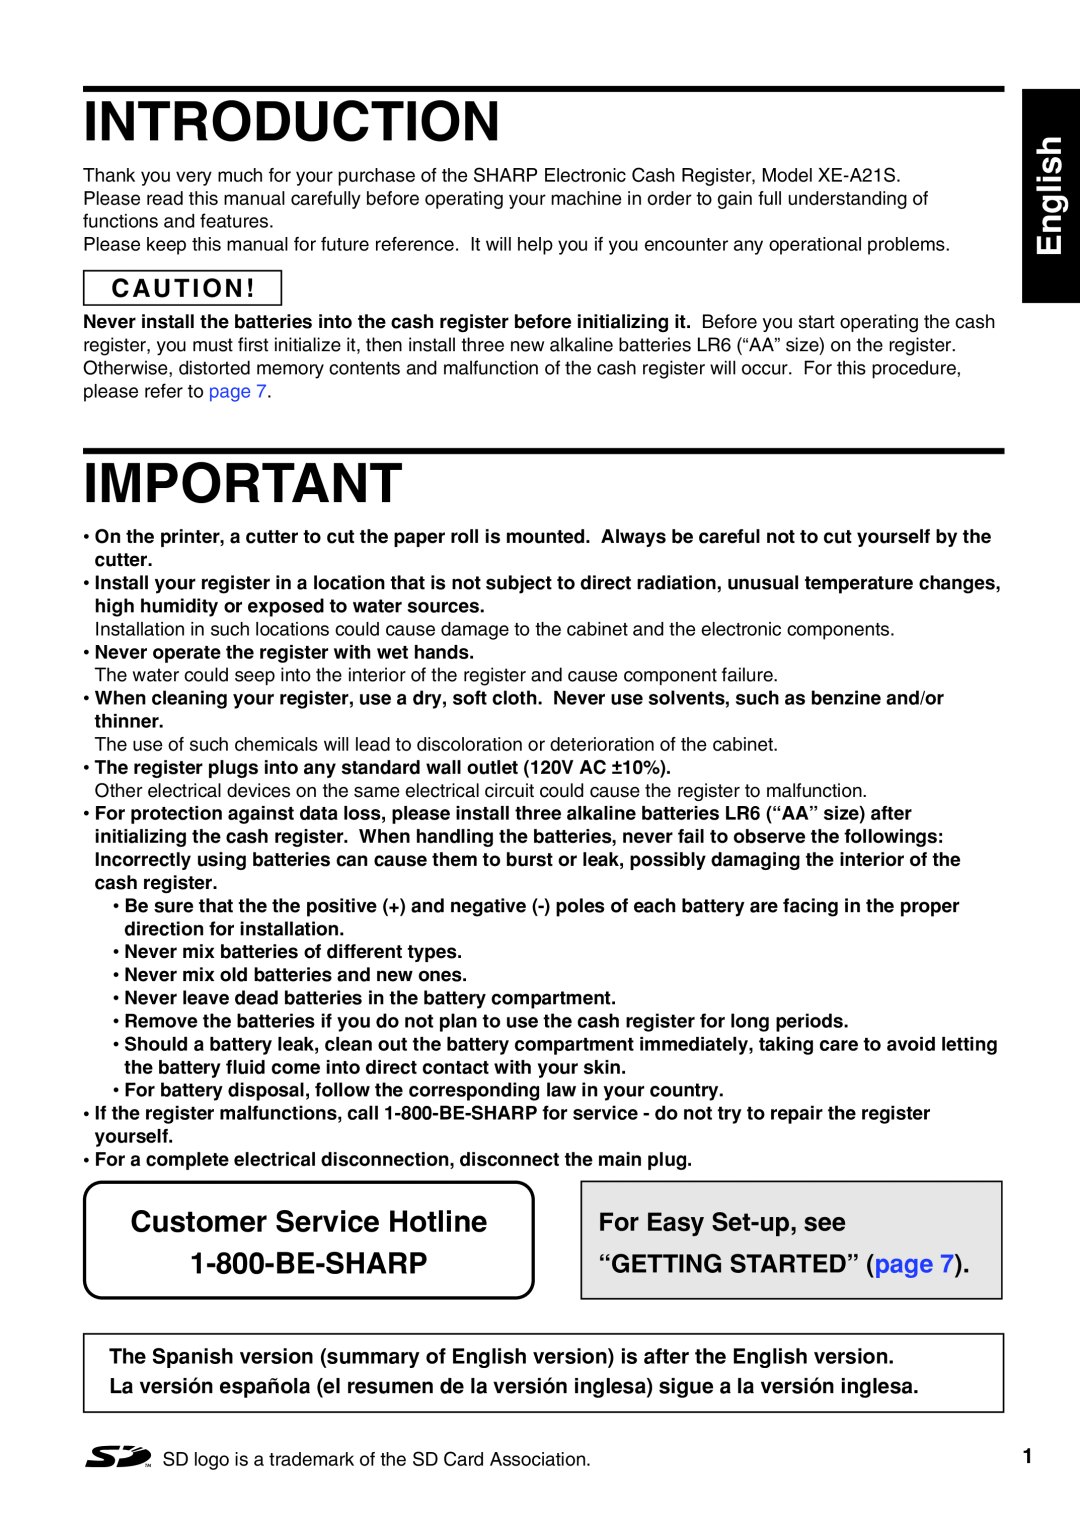 Sharp XE-A21S Introduction, English English, Customer Service Hotline, C A U T I O N, For Easy Set-up, see, Be-Sharp 